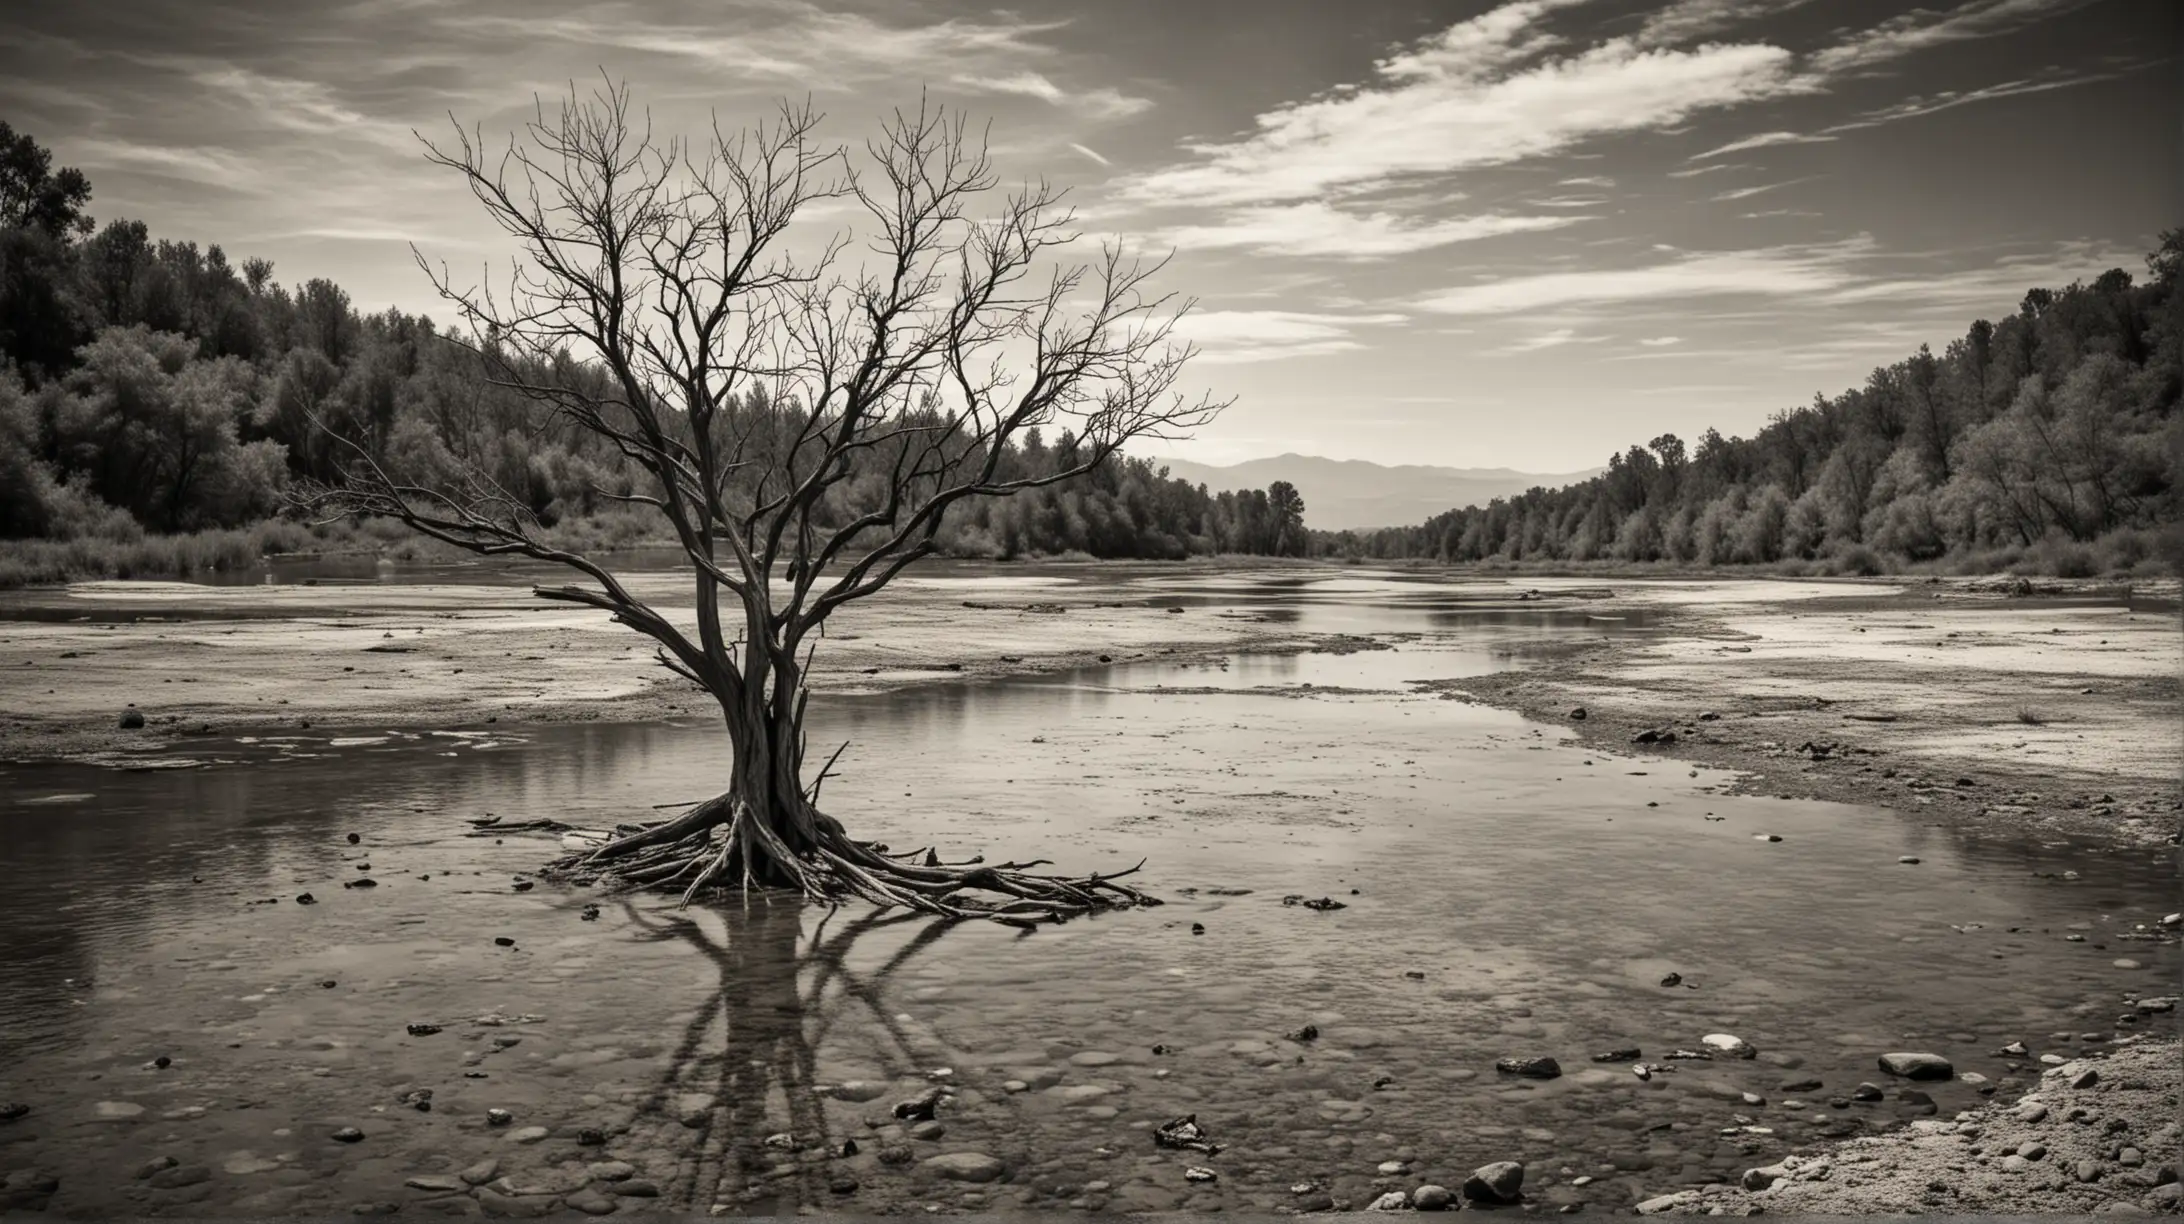 Barren Tree Silhouette in Grunge Black and White Landscape by the Lake